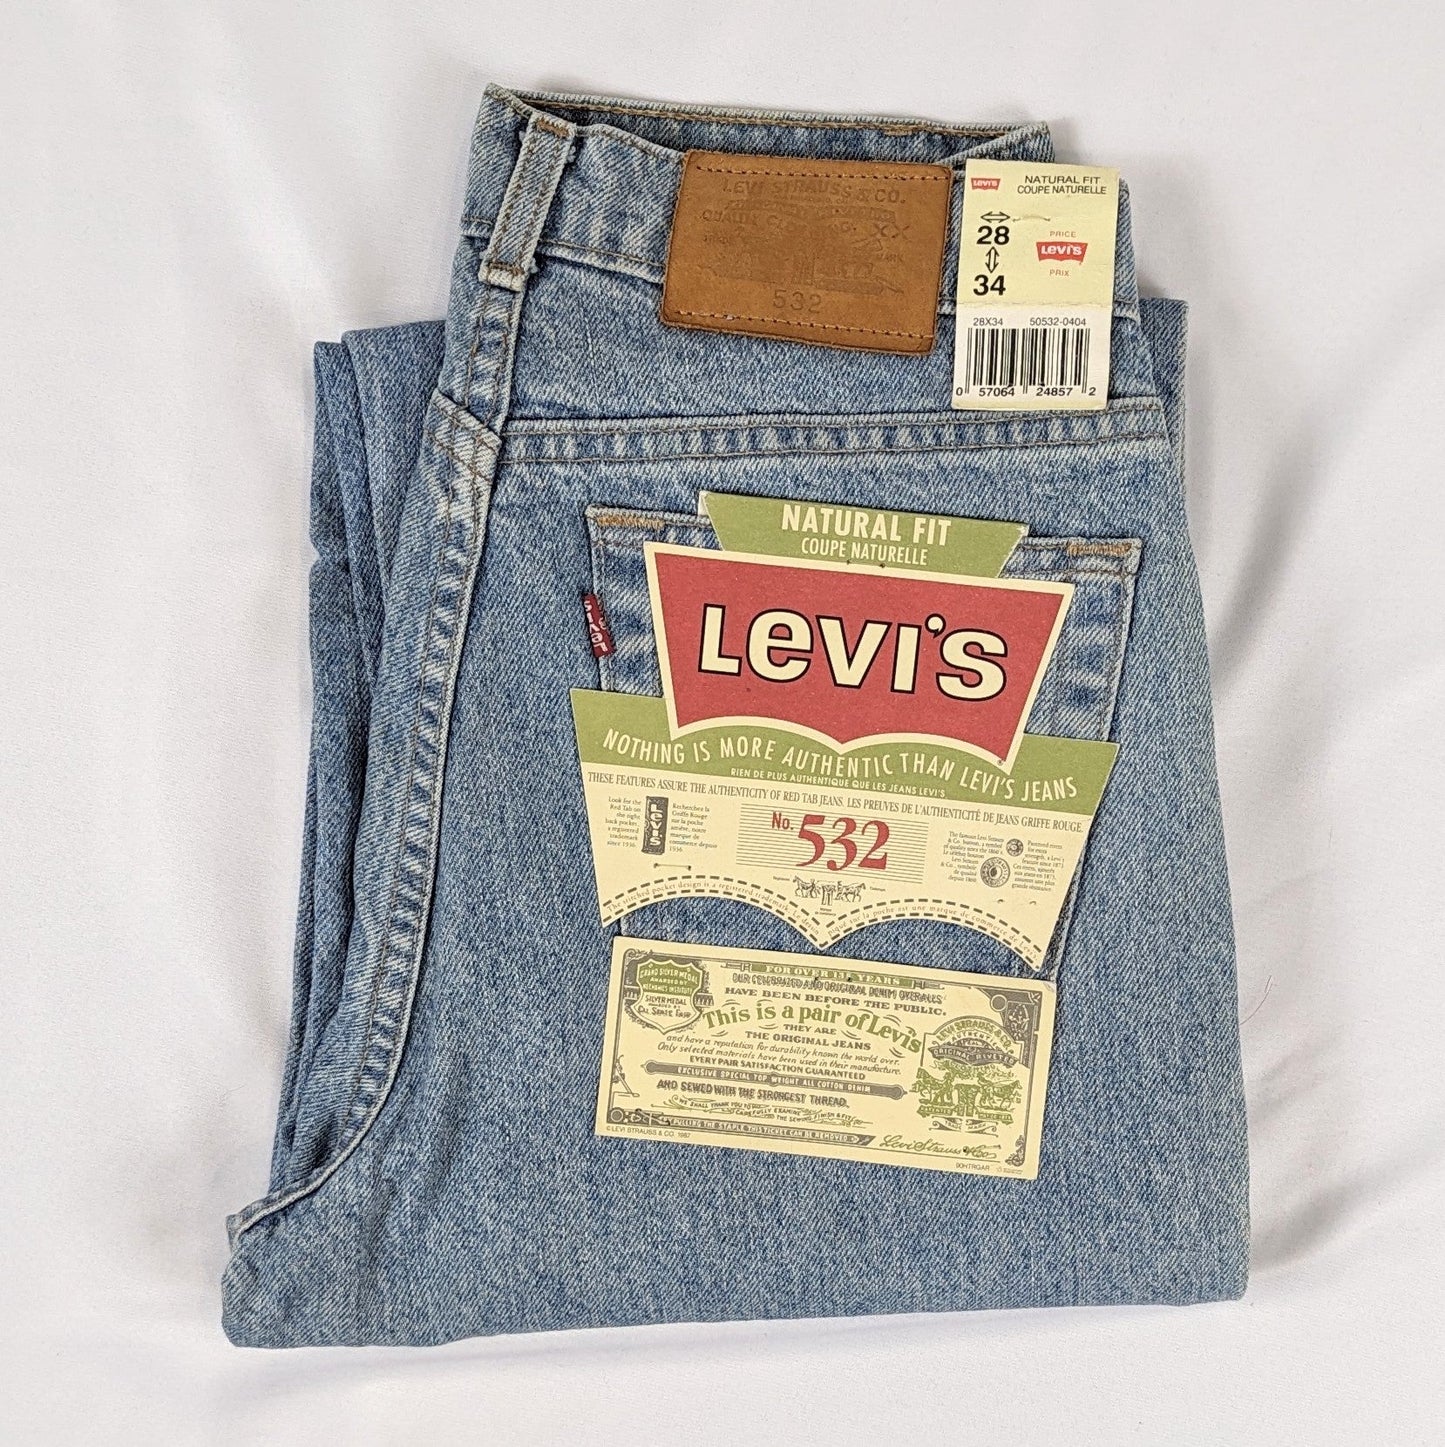 Levis jeans 532 vintage deadstock genuine leather made in Canada